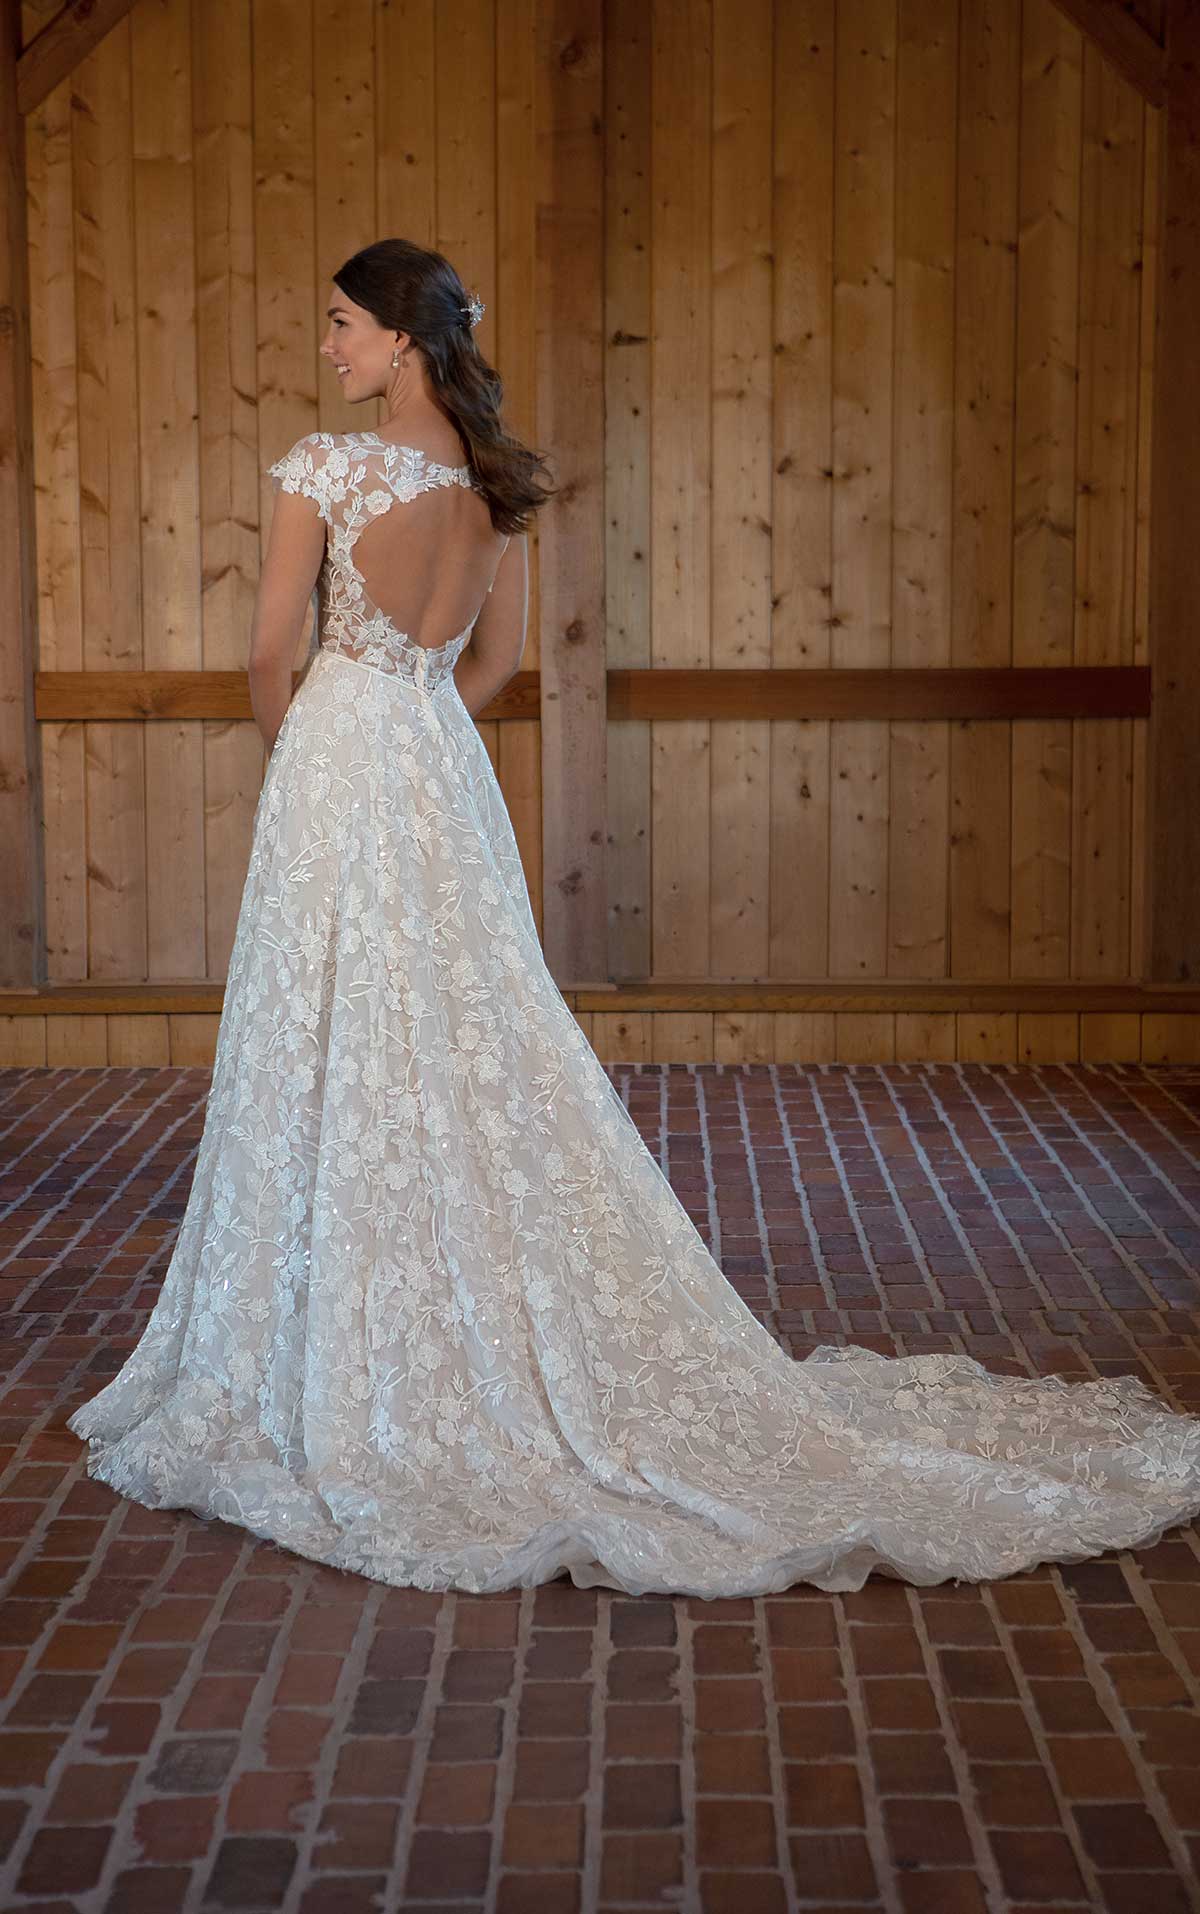 Romantic bridal gown with Peekaboo open back, plunge neckline and floral details